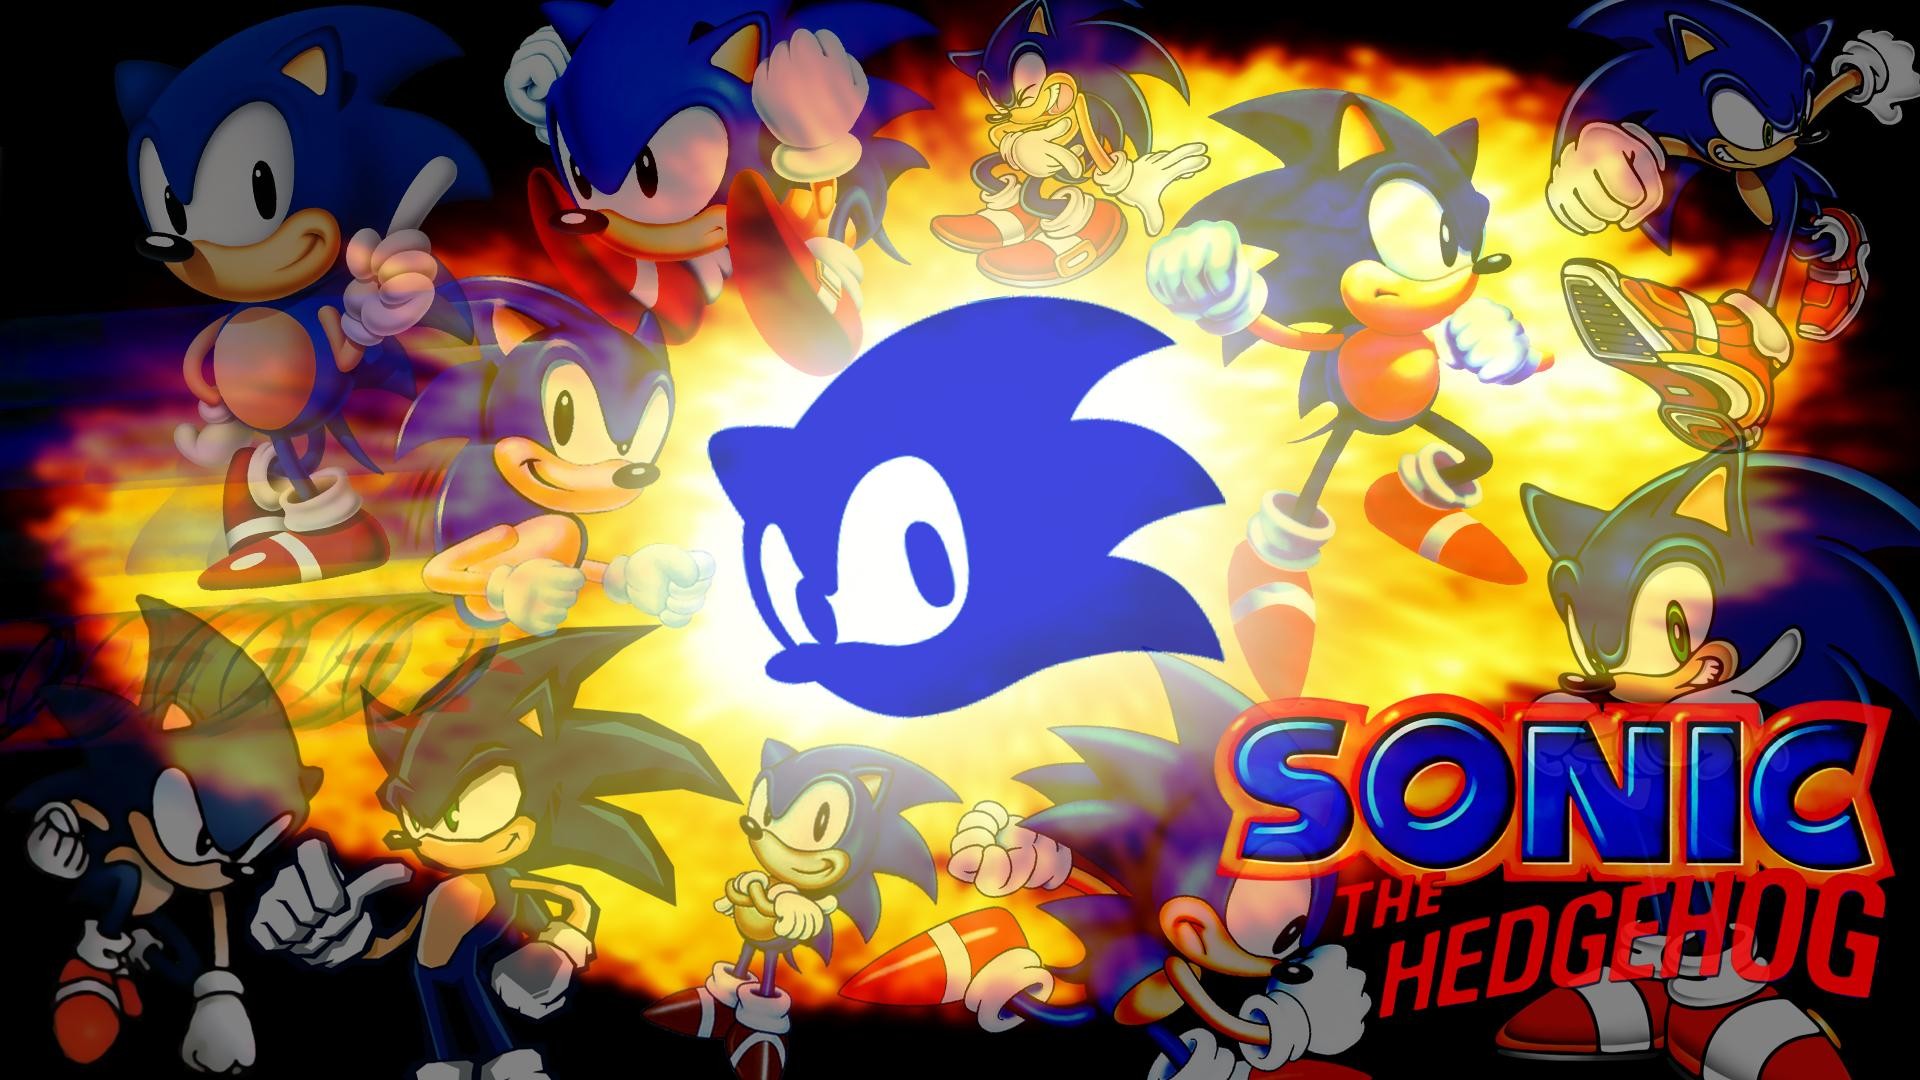 1920x1080 Sonic The Hedgehog Wallpapers 2015 - Wallpaper Cave